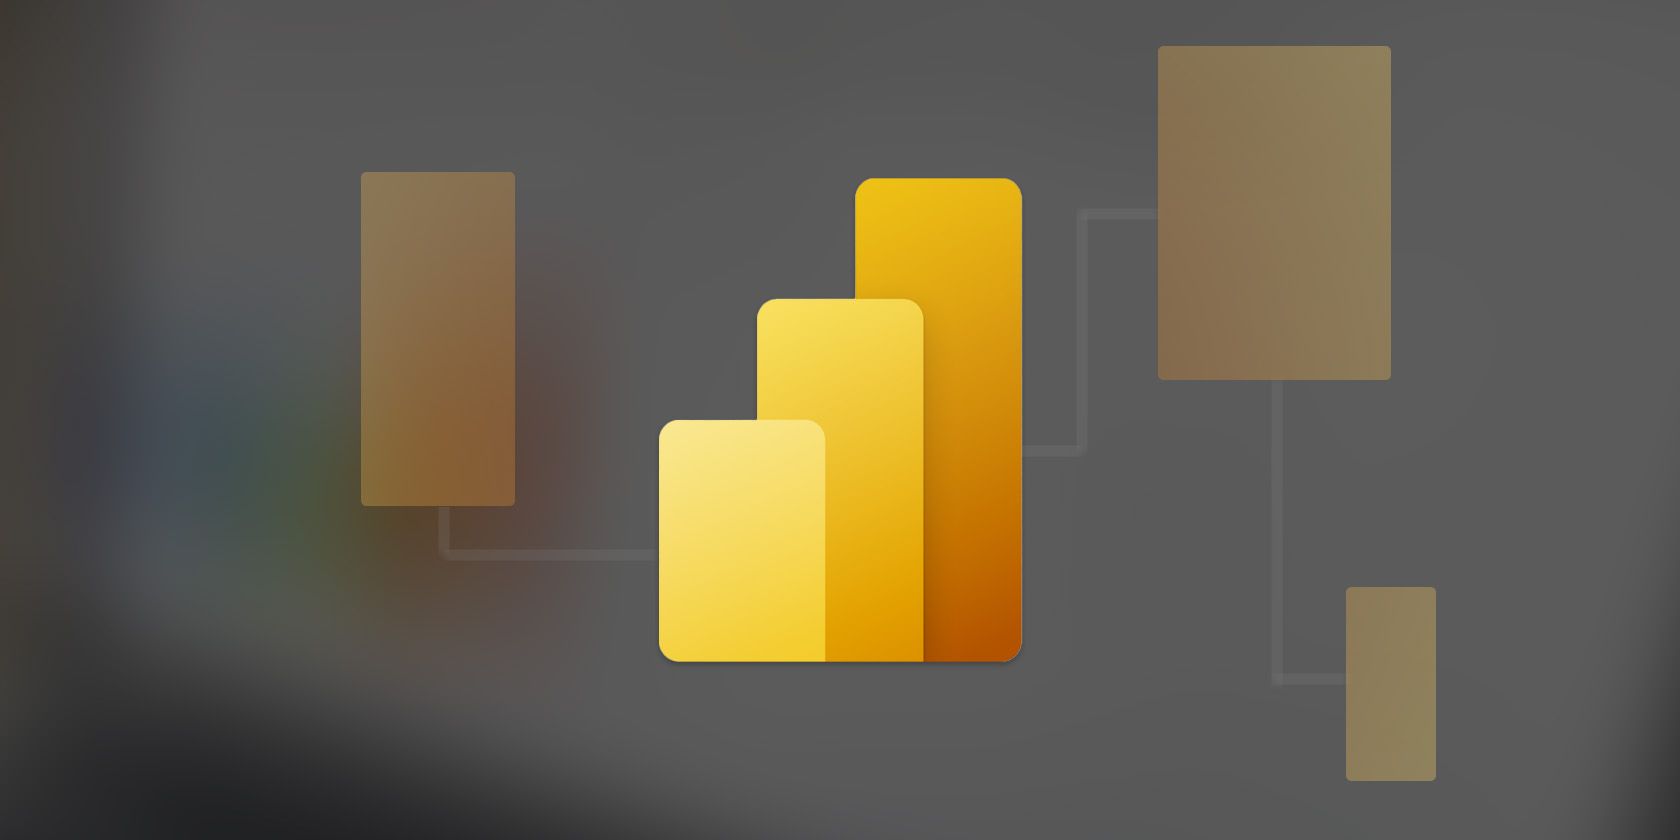 Power BI logo connected to dimension tables